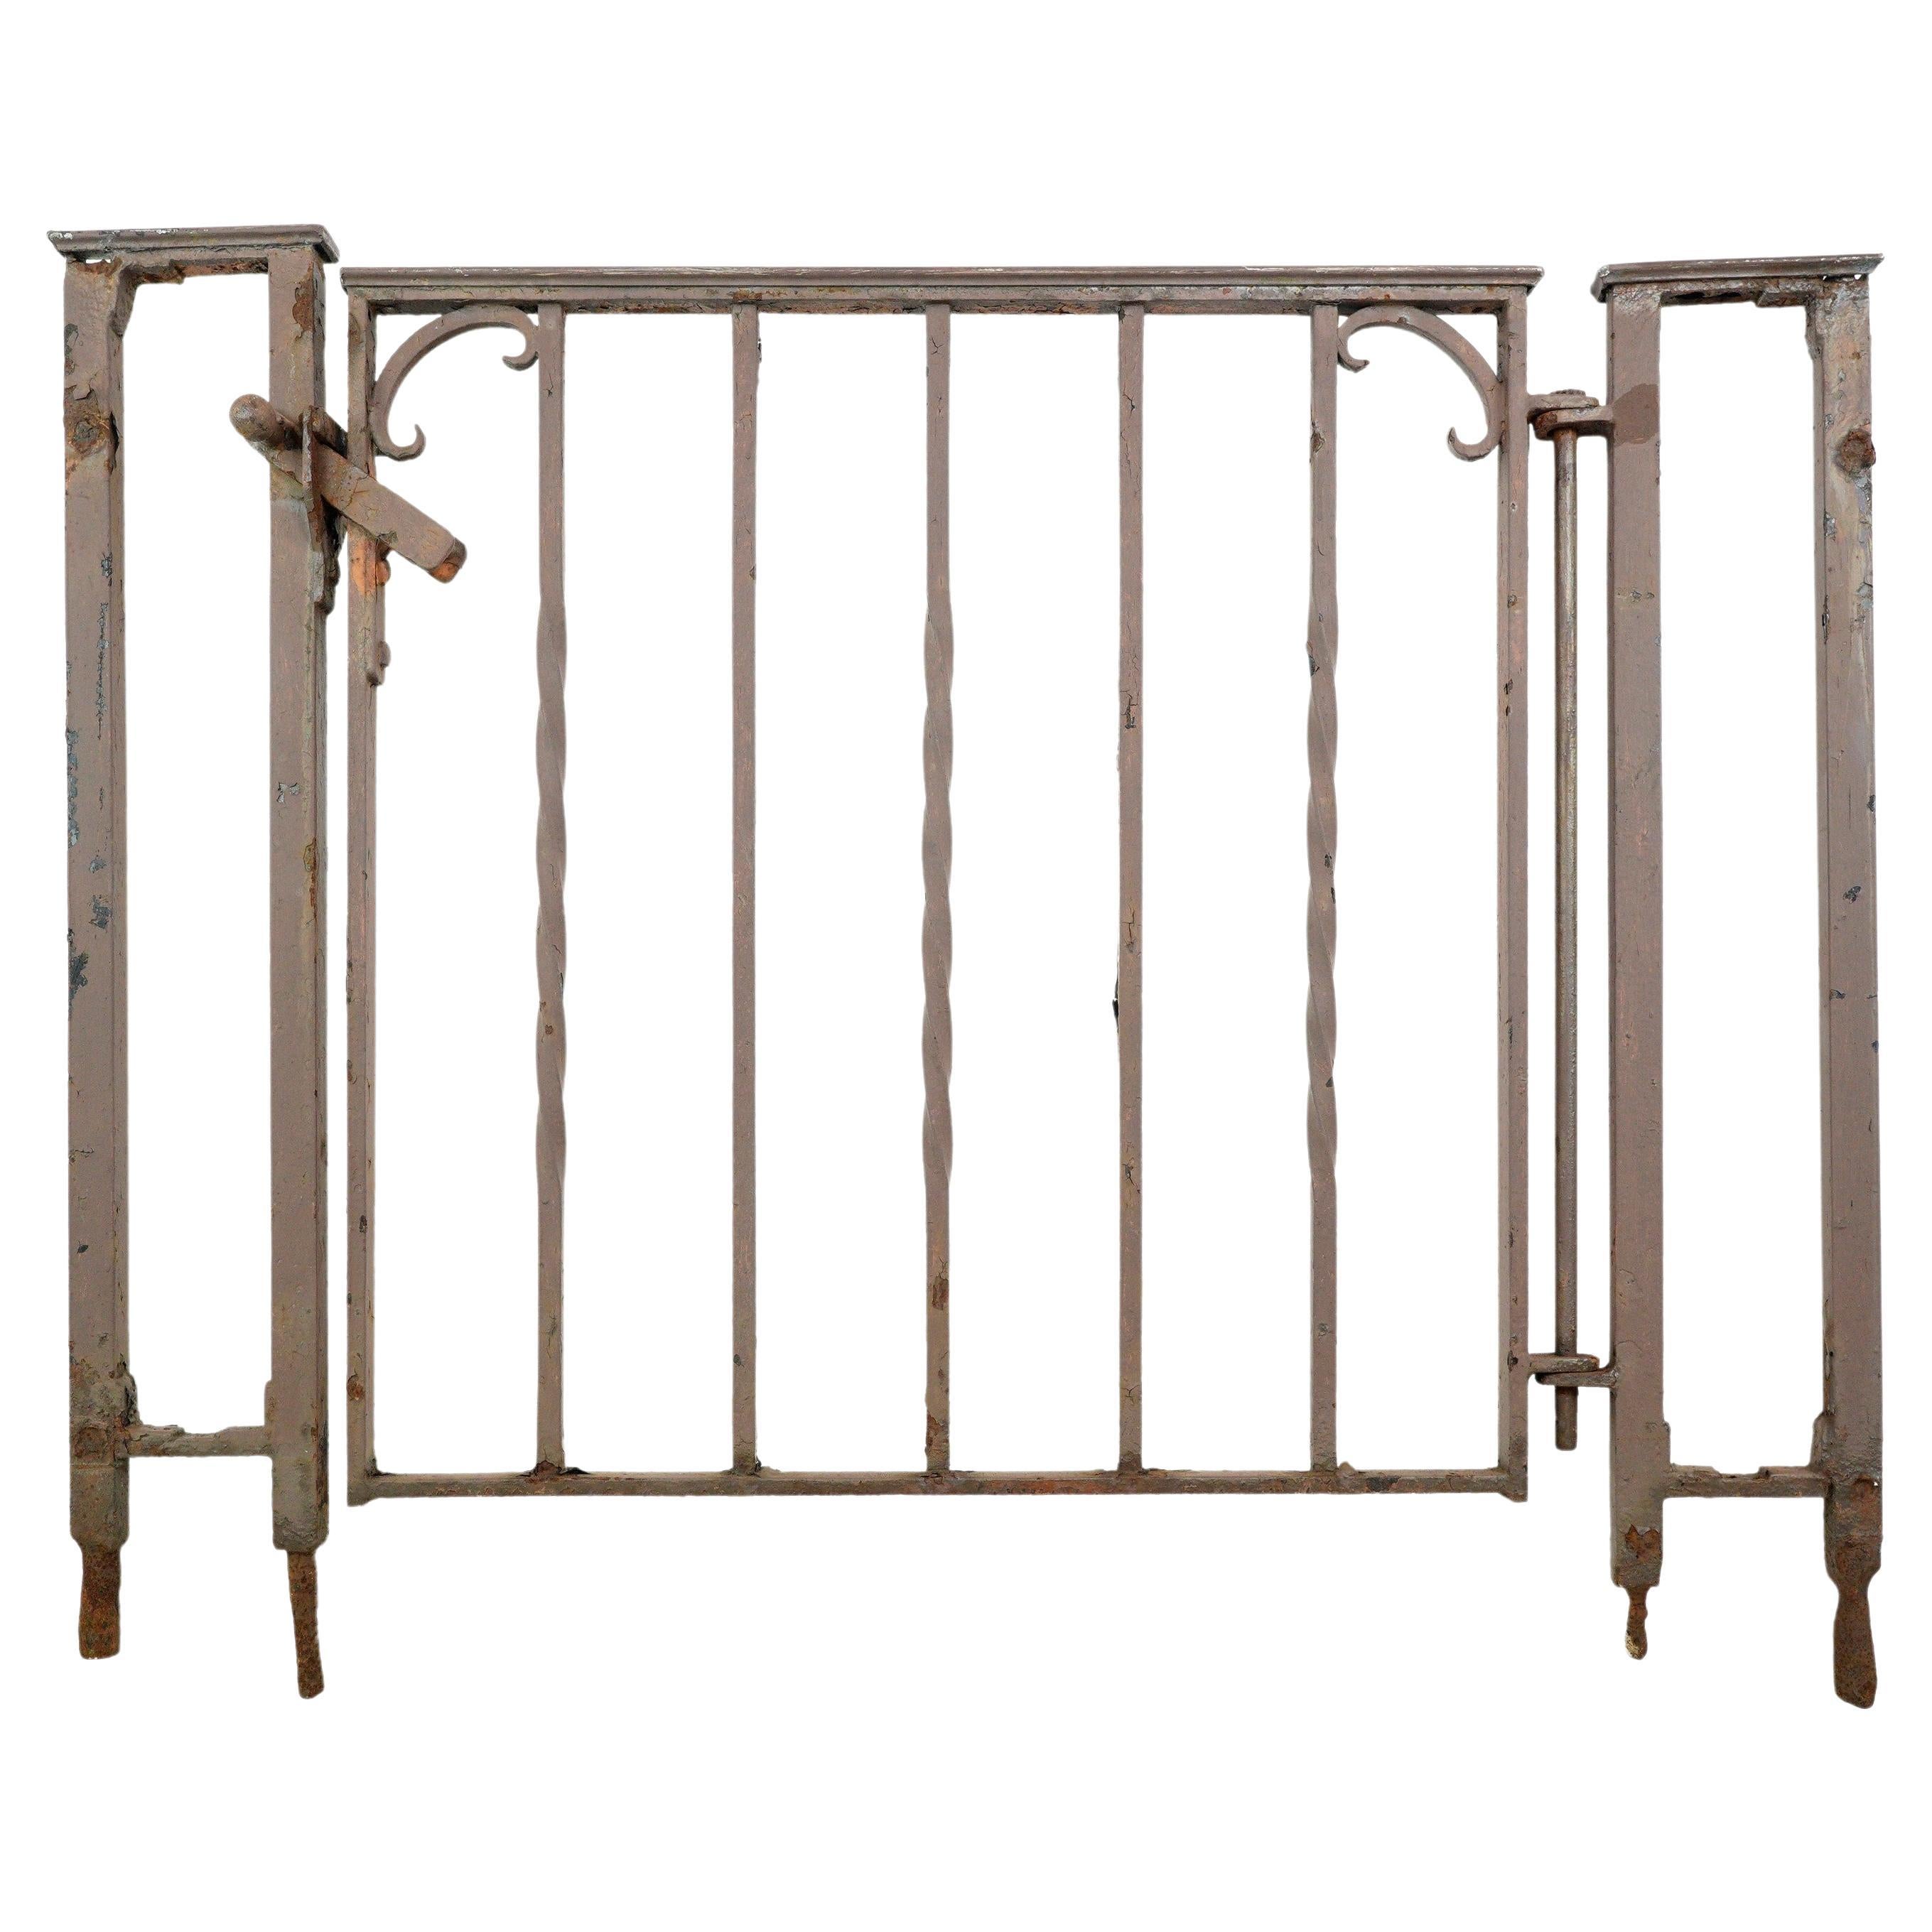 3 Piece Wrought Iron Yard Gate Set For Sale